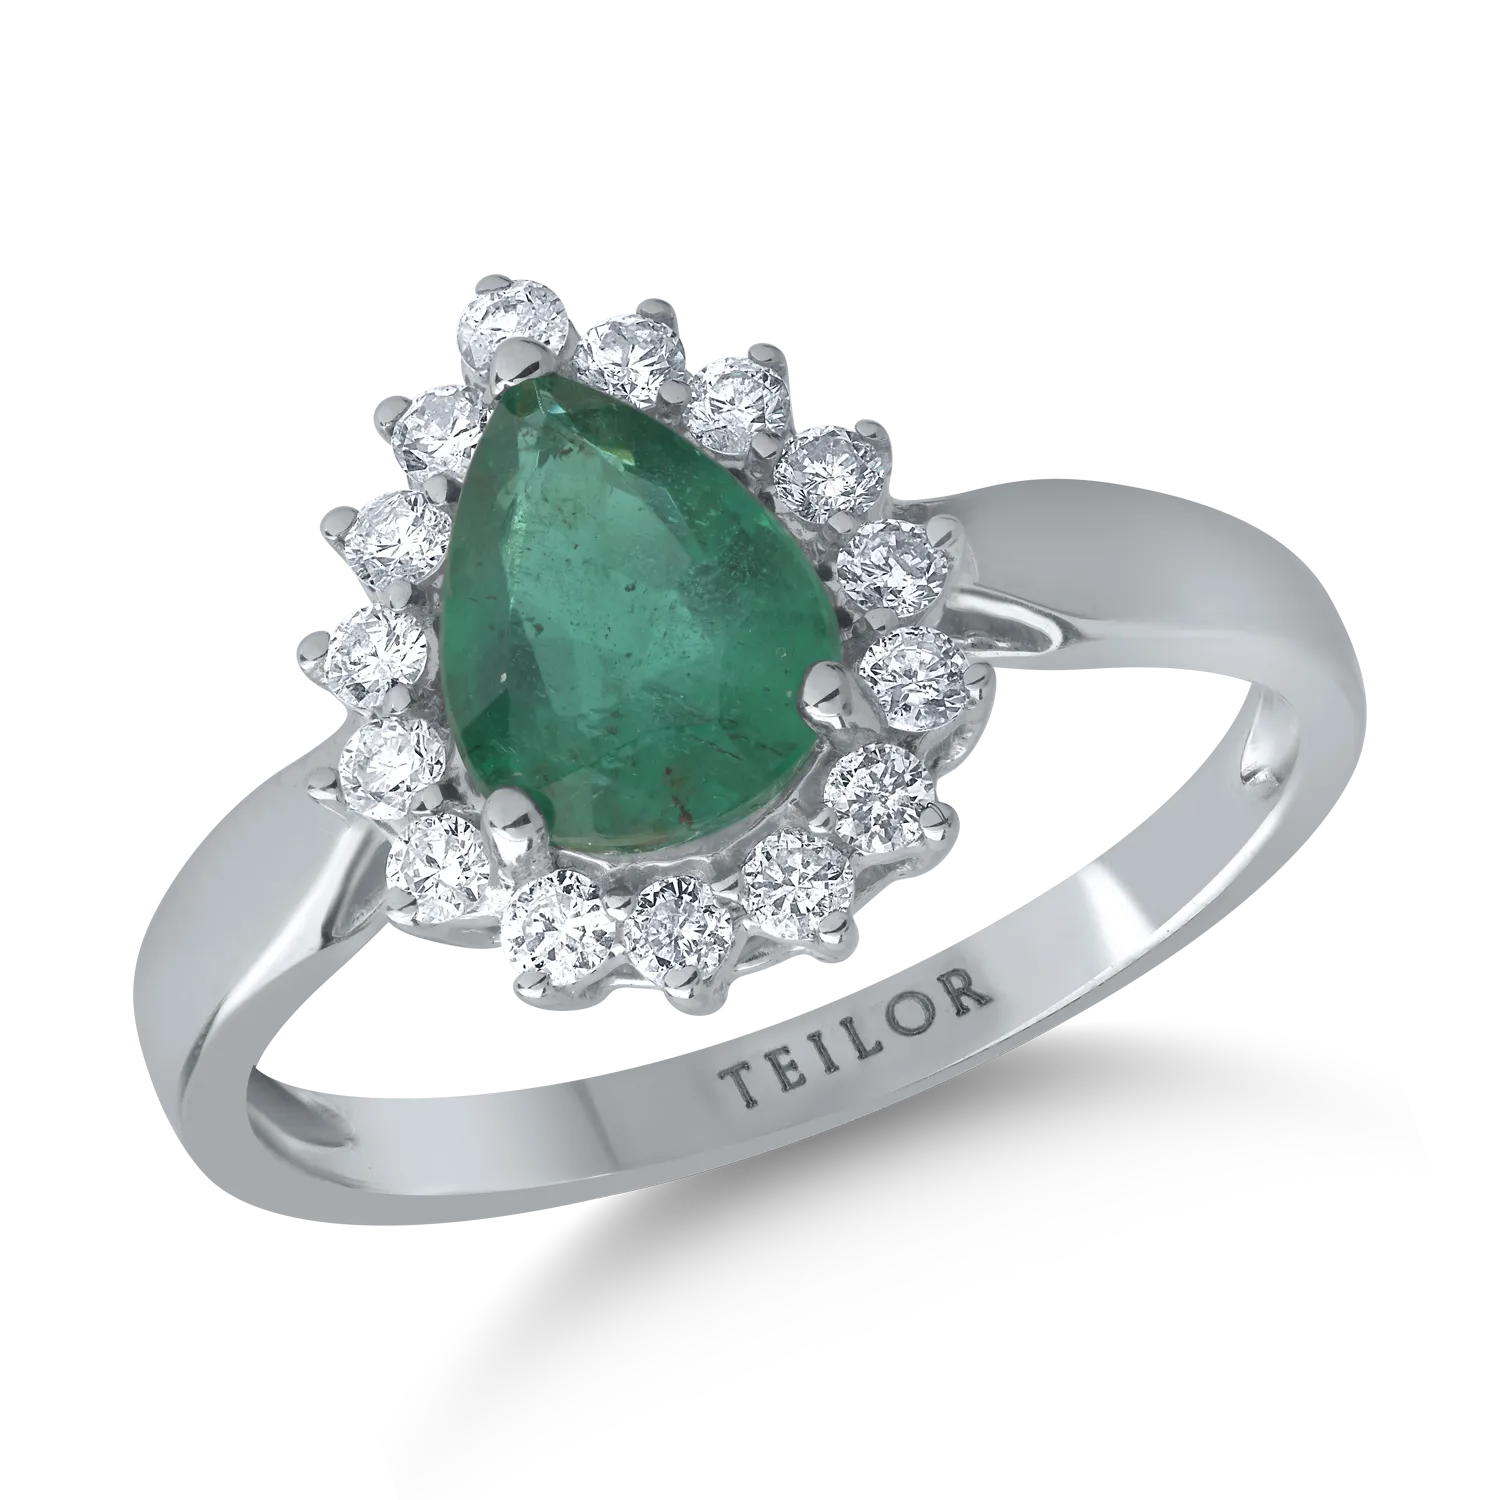 18K white gold ring with 1.07ct emerald and 0.29ct diamonds